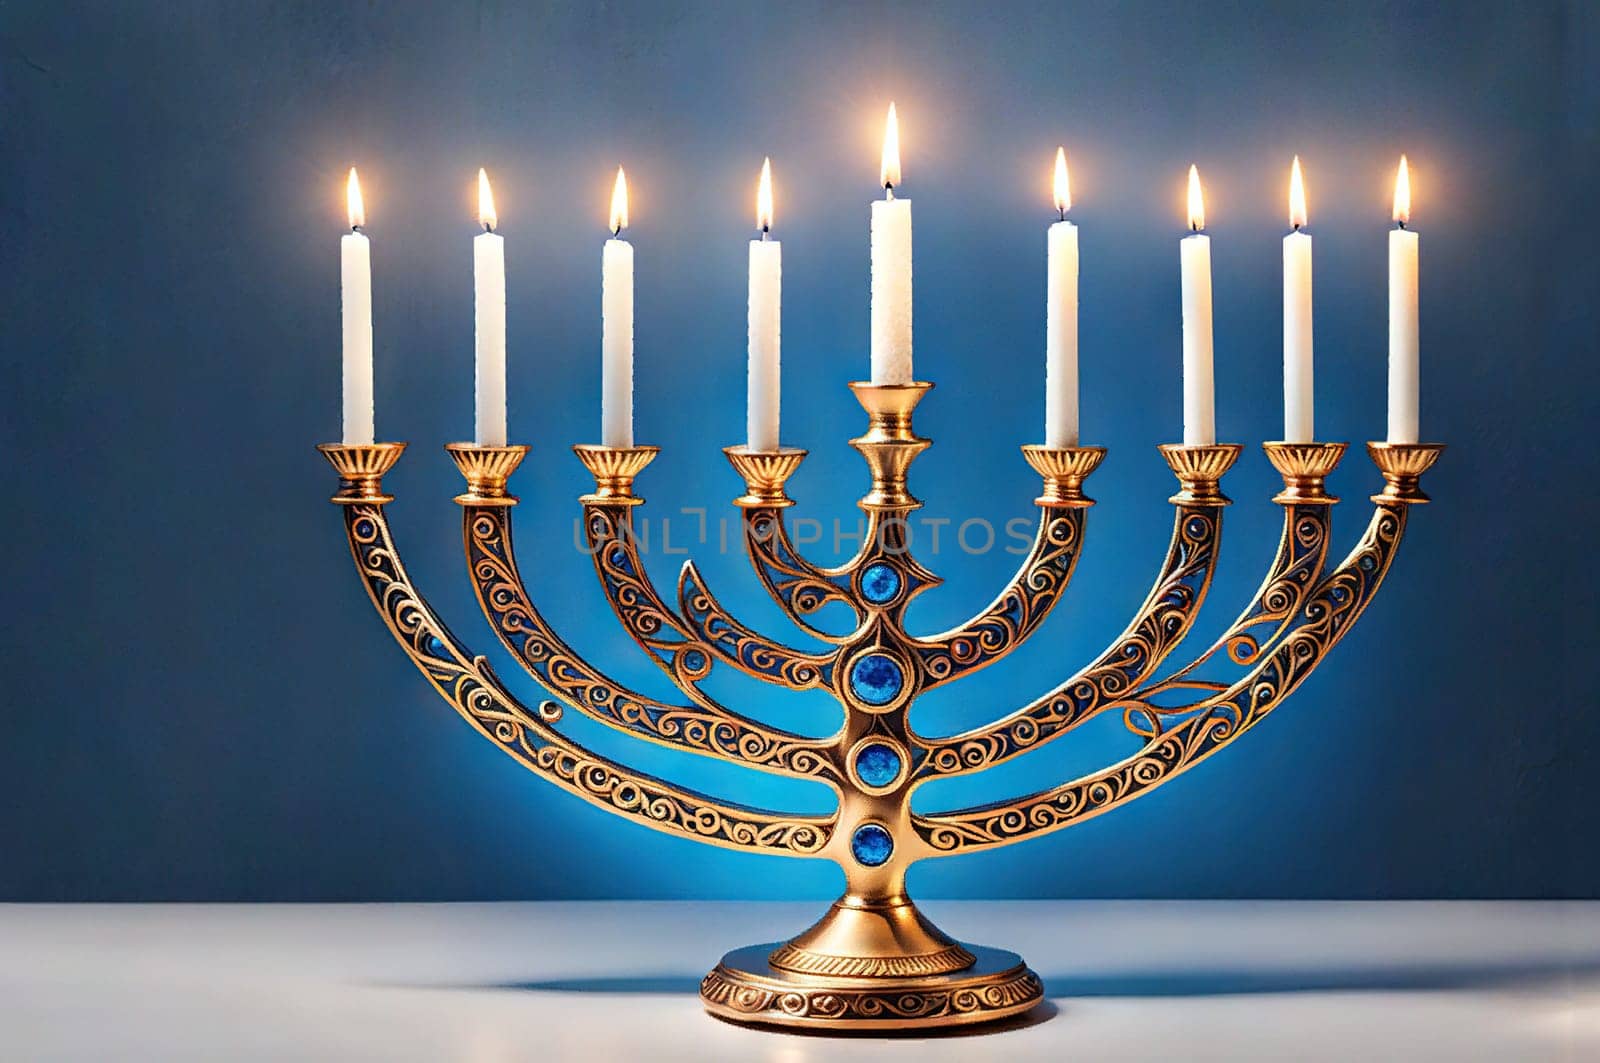 Bronze Hanukkah menorah with burning candles on table. Holiday greeting card concept.